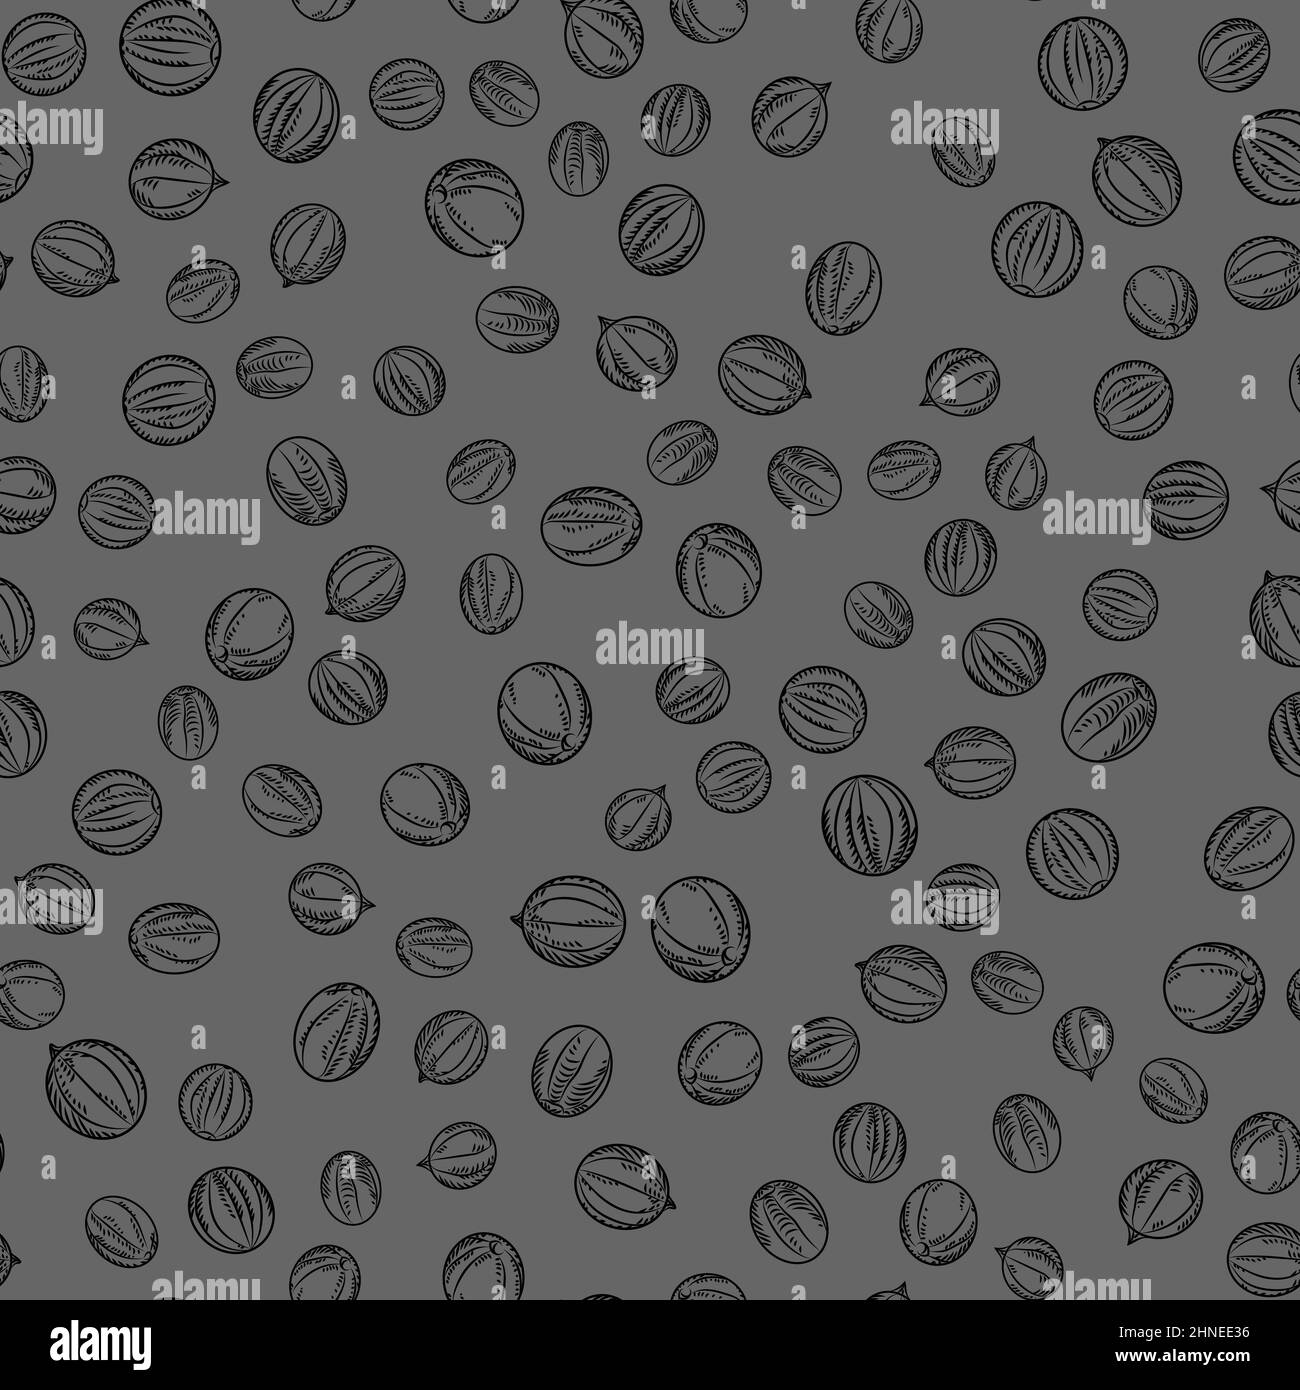 Black pepper seamless pattern on black background. Cooking ingredients wallpaper. Monochrome engraving vintage style. Vector illustration. Stock Vector